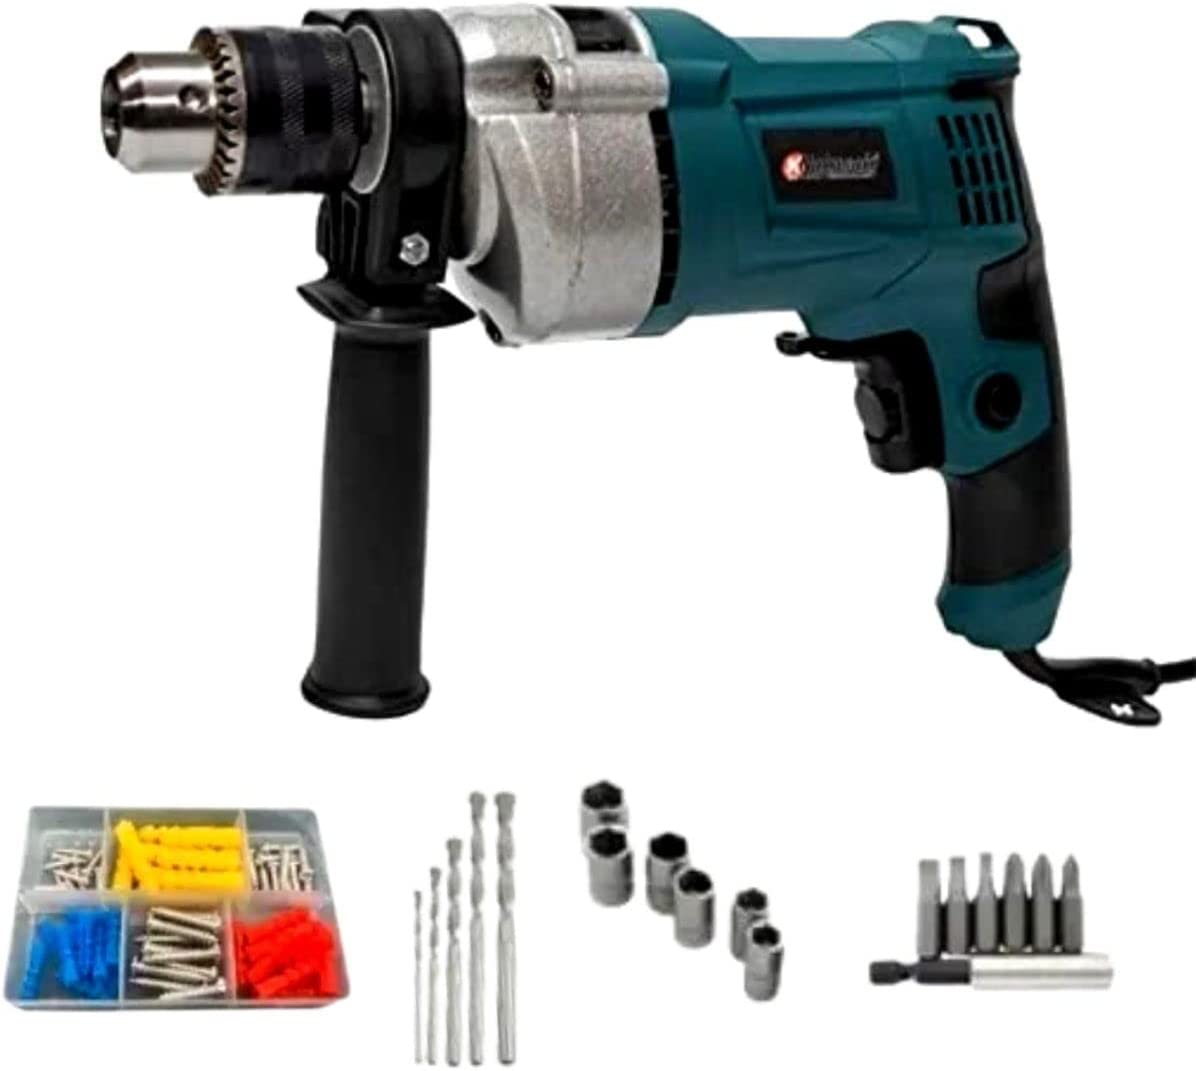 2-In-1 Electric Drill Corded Impact Drill Durable And Swivel With 28 Plastic Parts - Electric Tools - Drill, Power Drill, Impact Drill